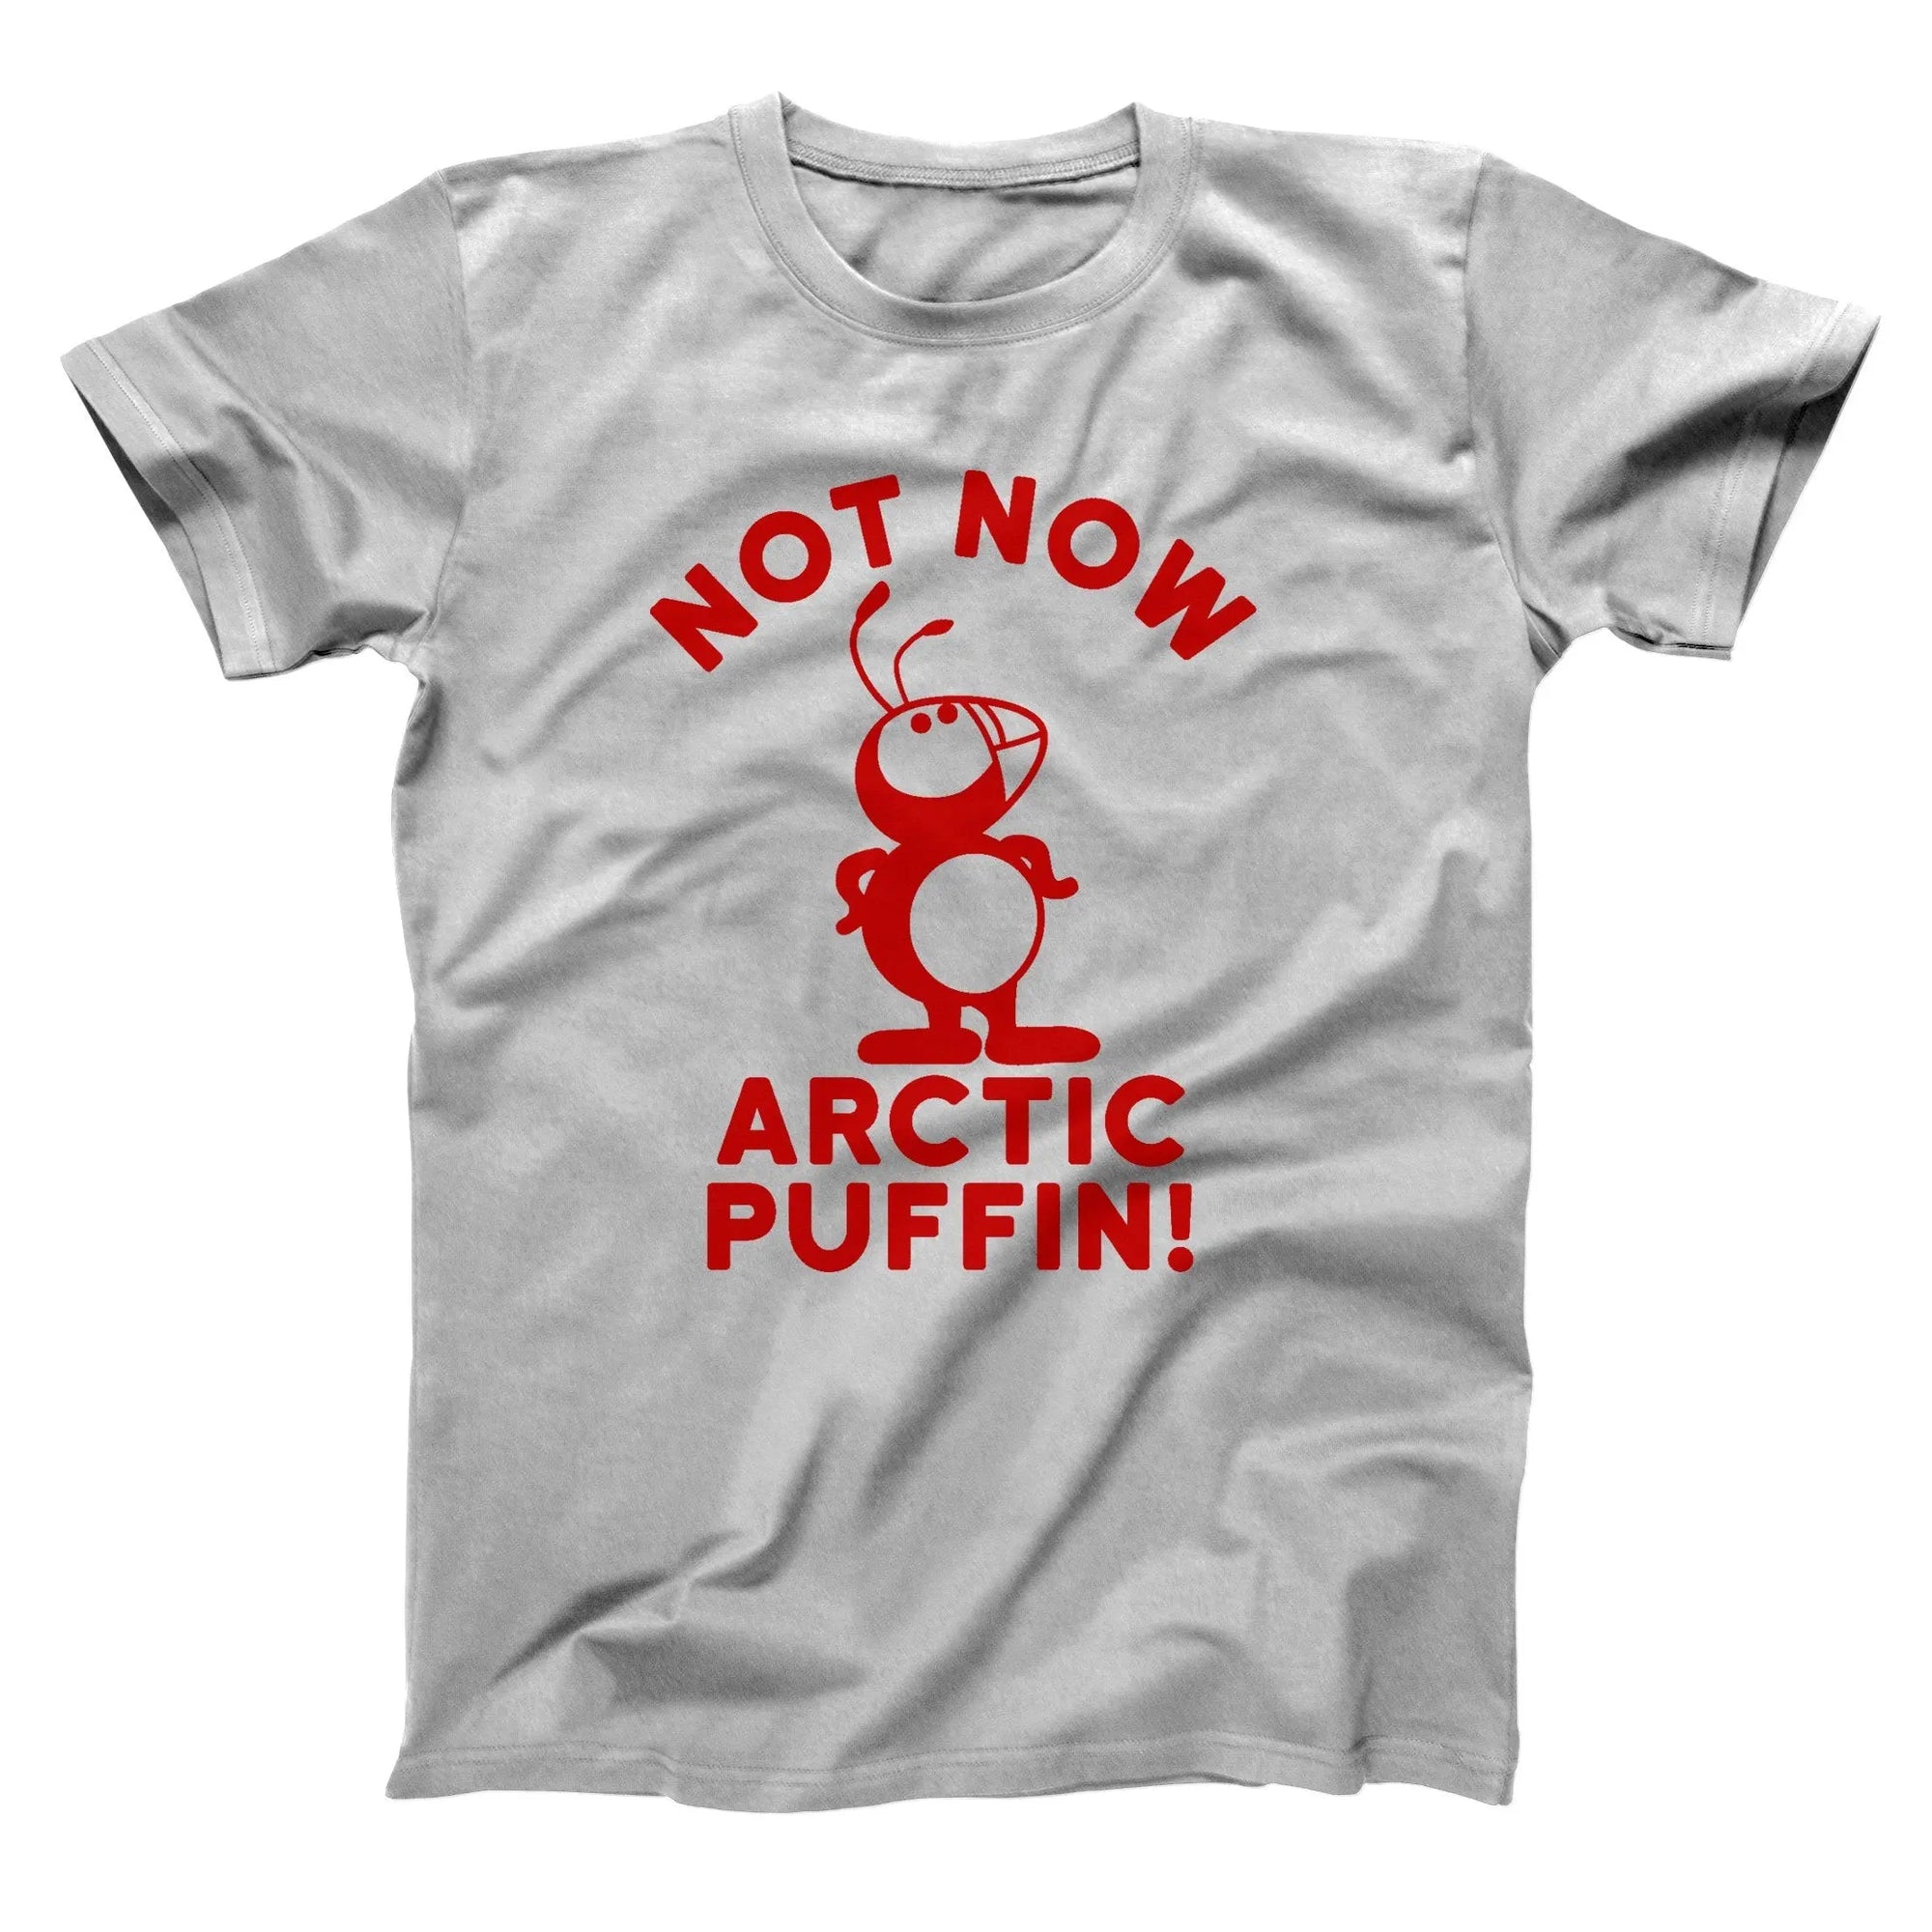 Not Now Arctic Puffin Tshirt - Donkey Tees